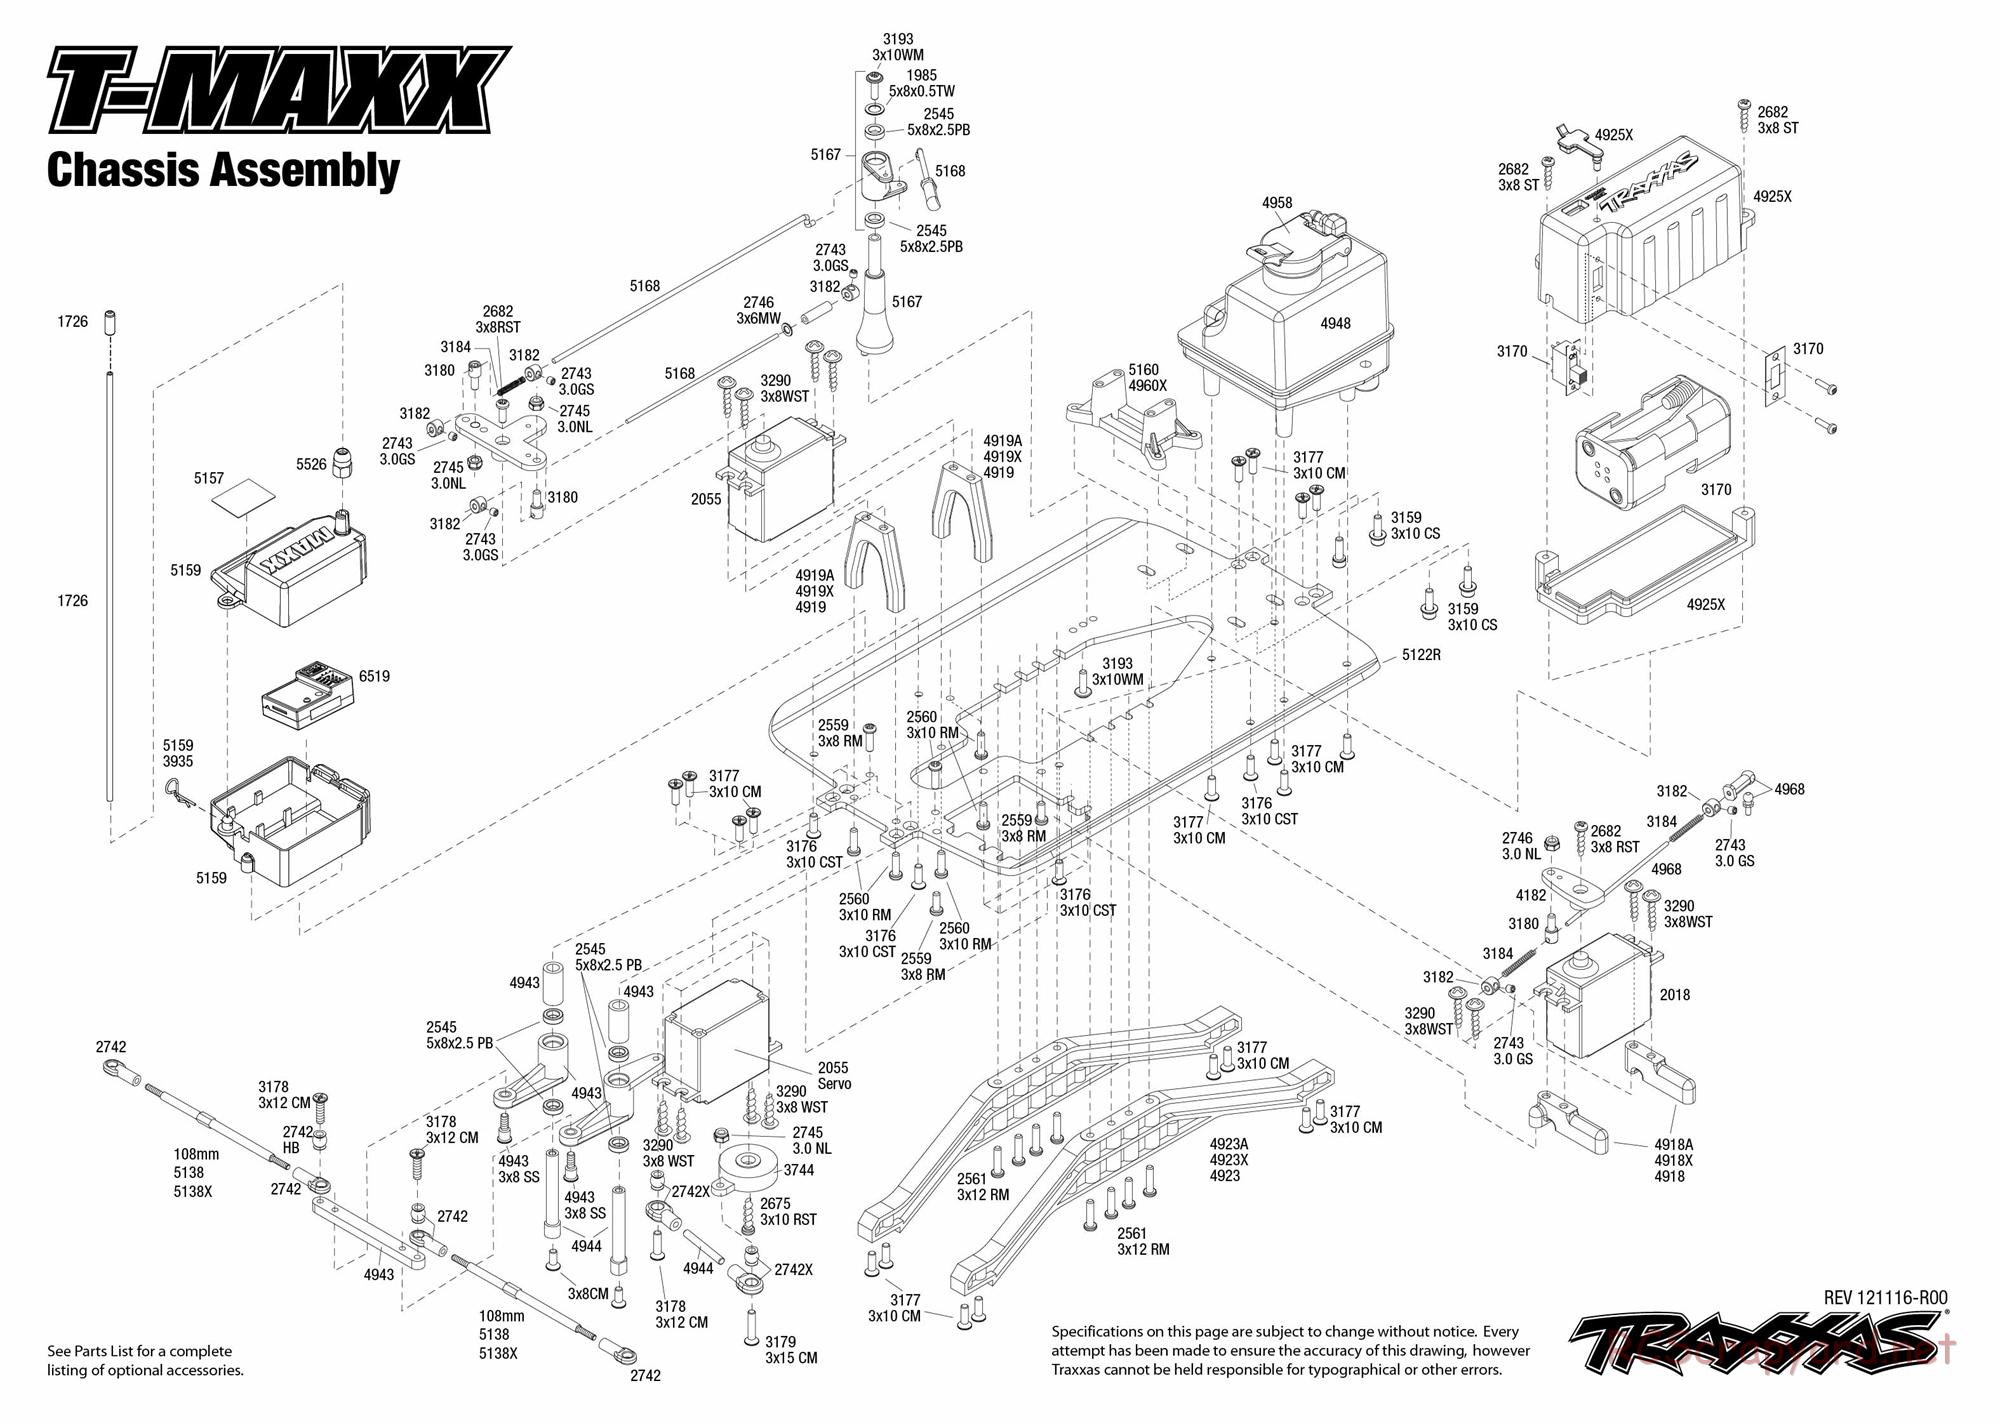 Traxxas - T-Maxx Classic (2013) - Exploded Views - Page 1